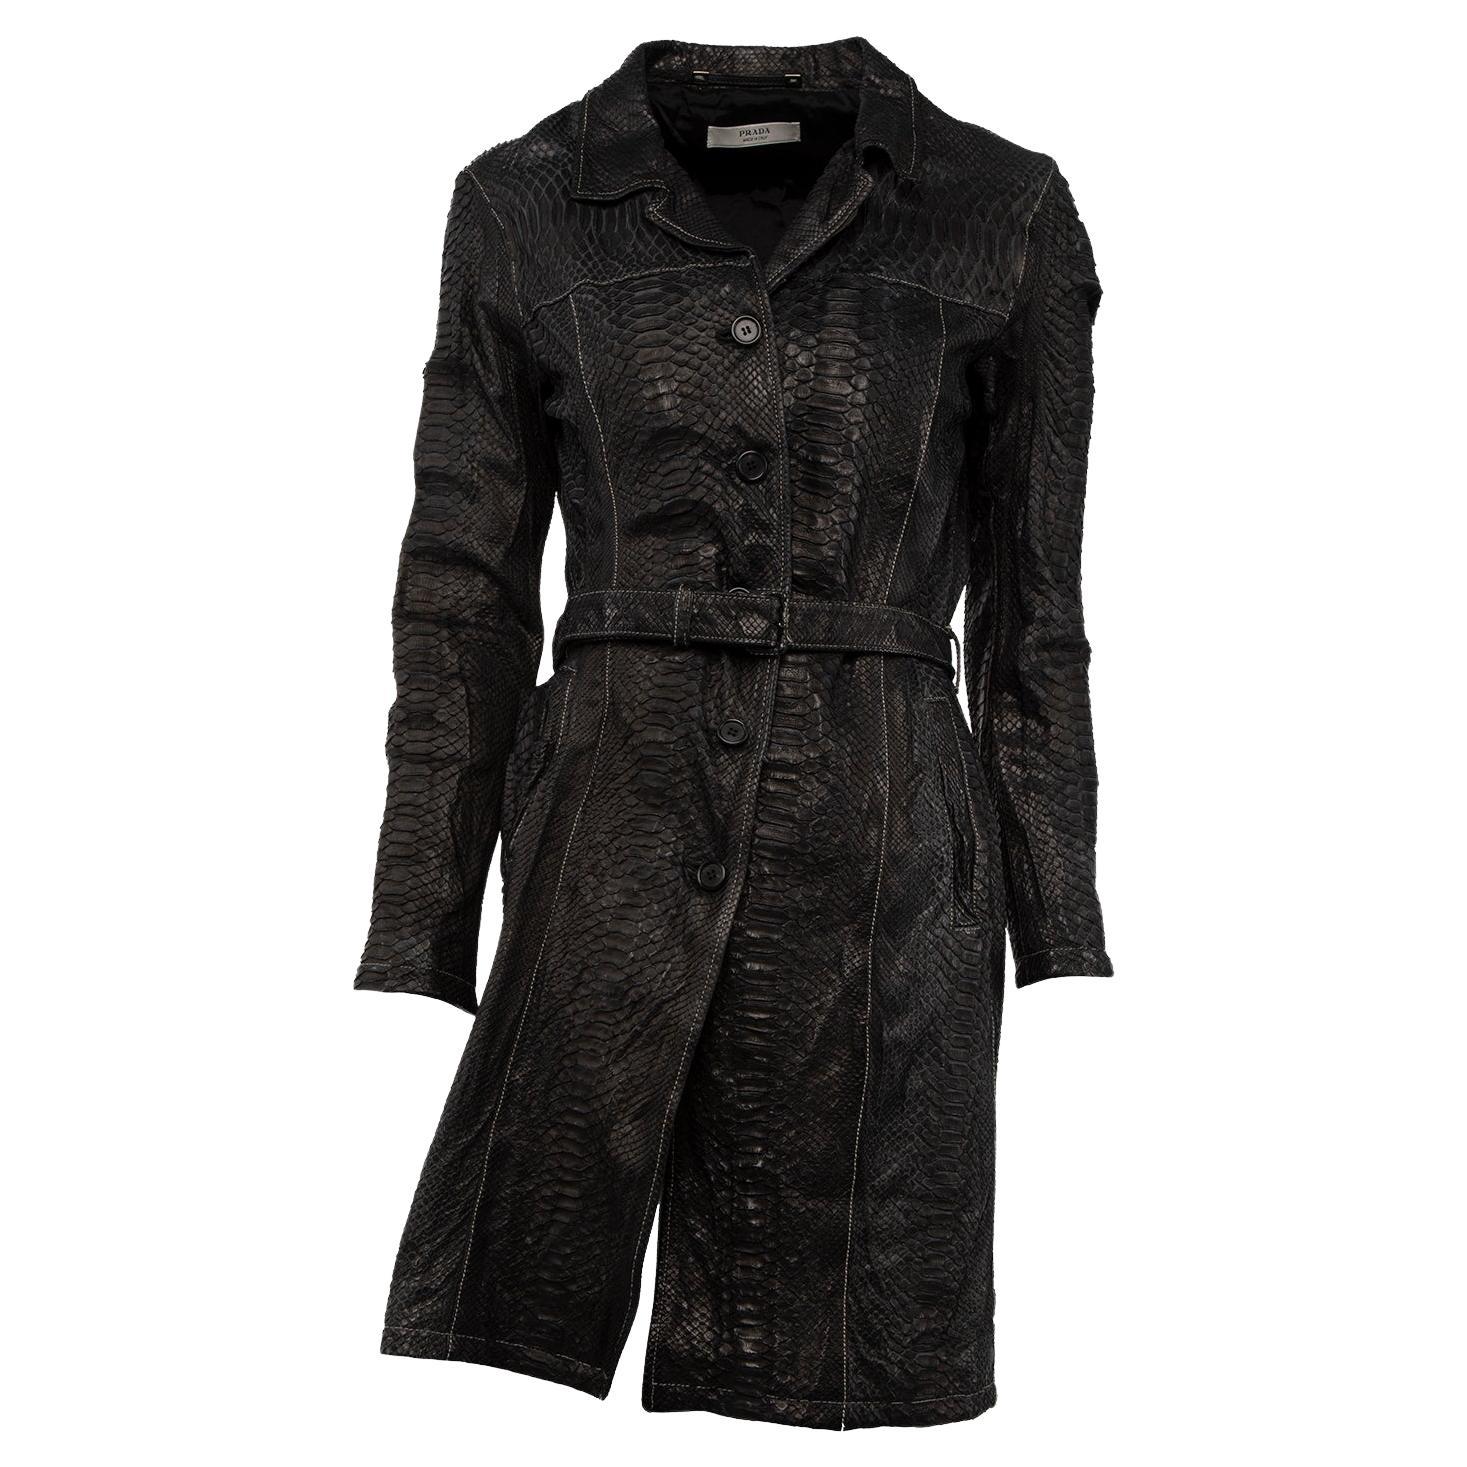 Pre-Loved Prada Women's Python Belted Trench Coat